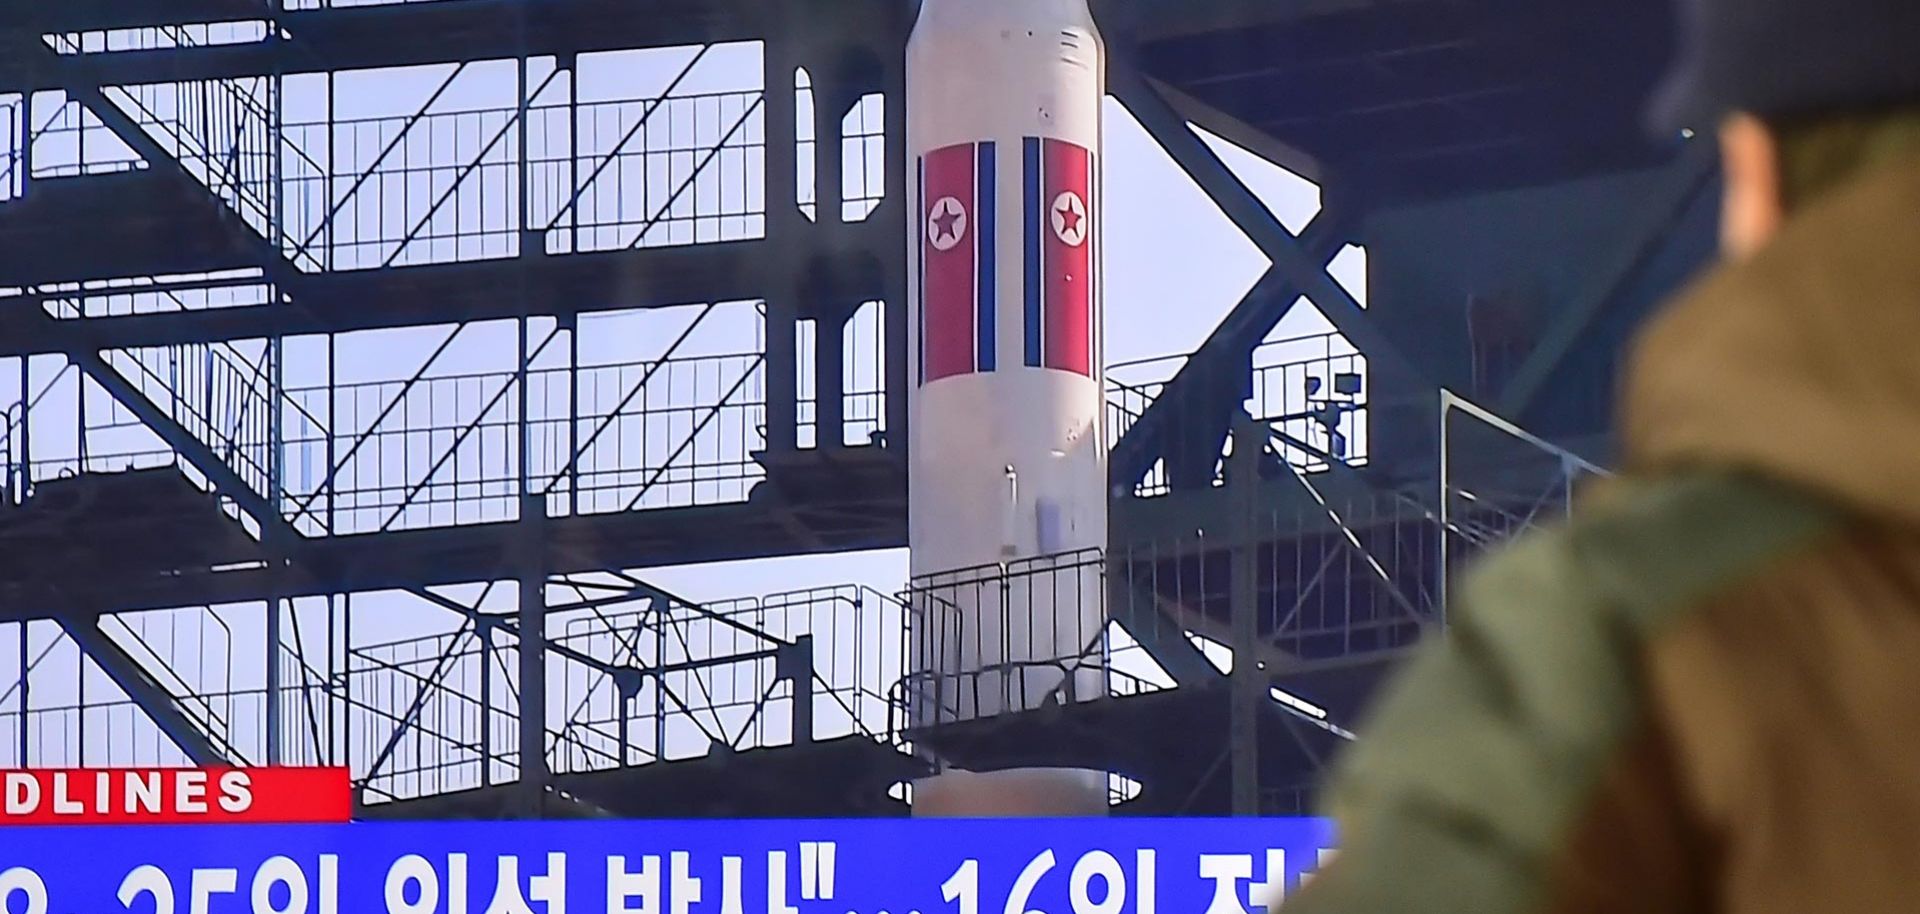 North Korea's Nuclear Ambitions Ride on Missile Development